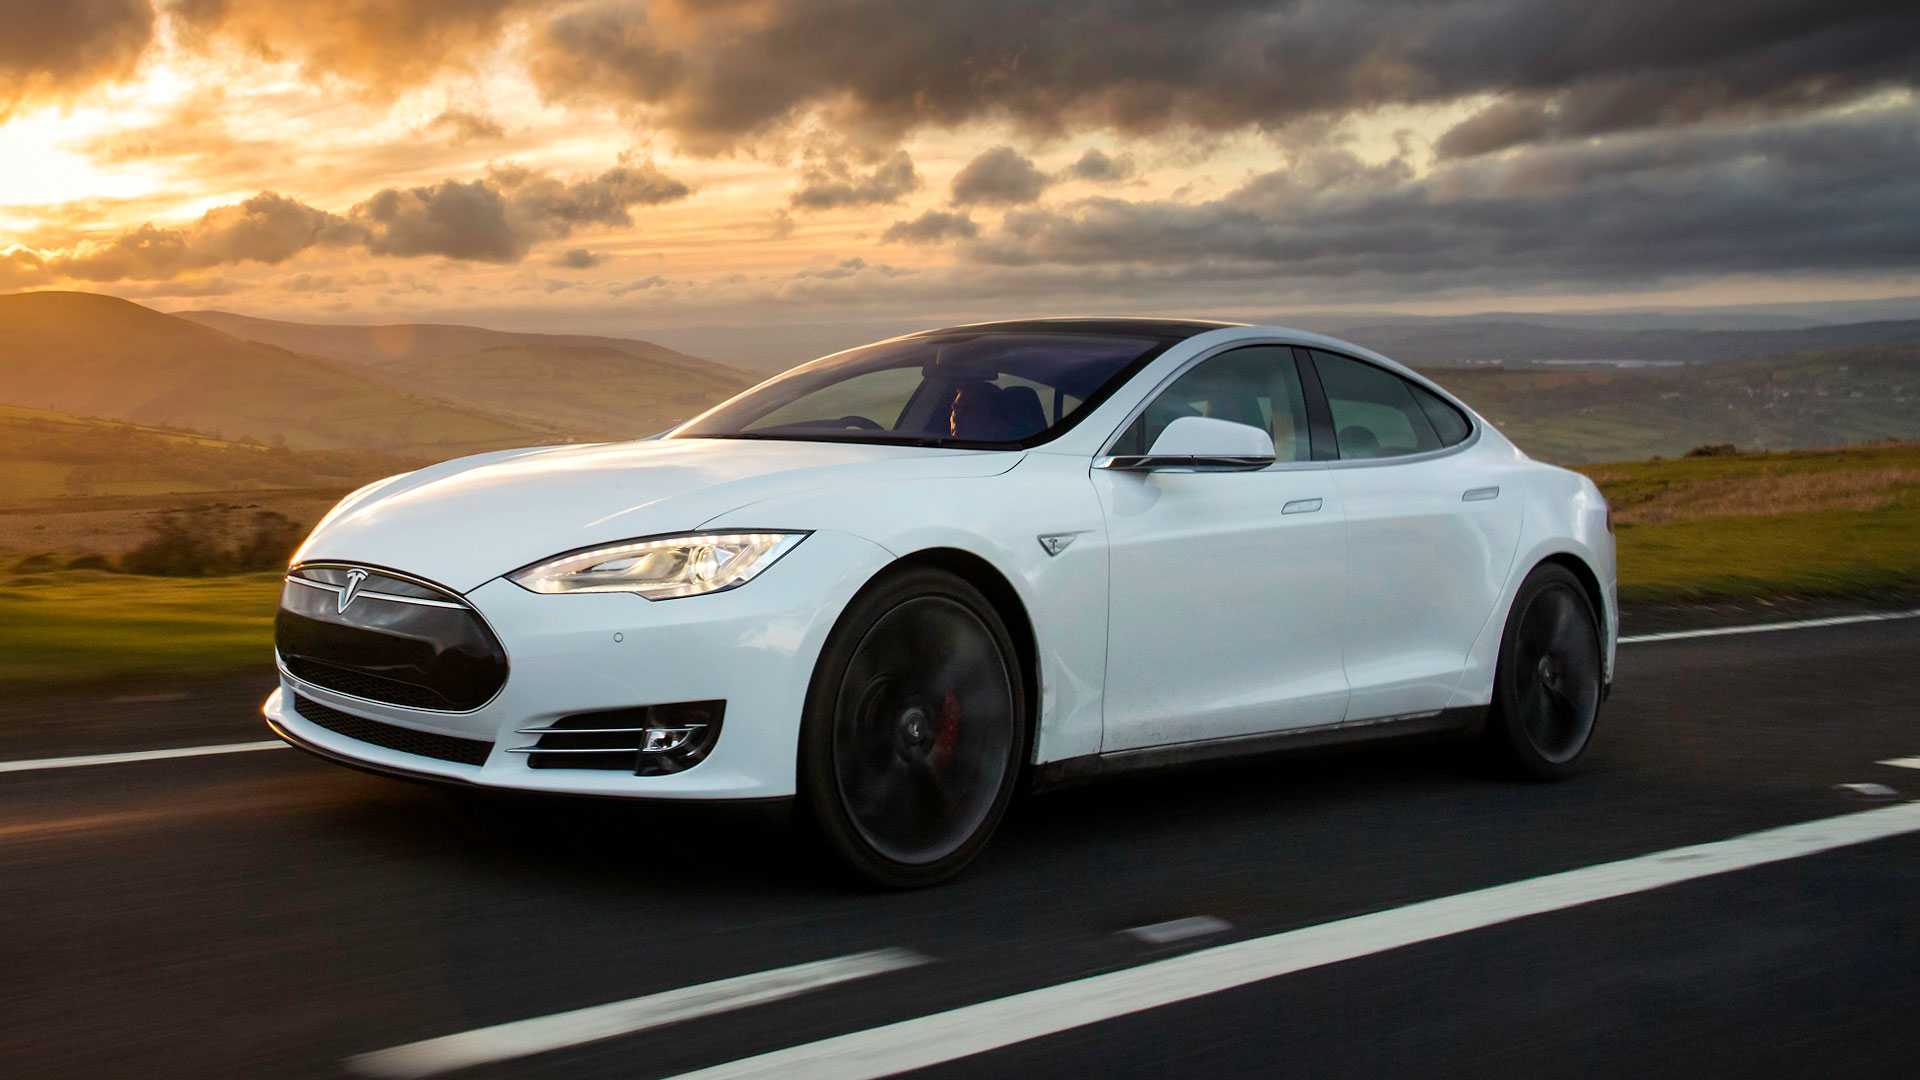 Tesla Model S - greatest cars of the decade